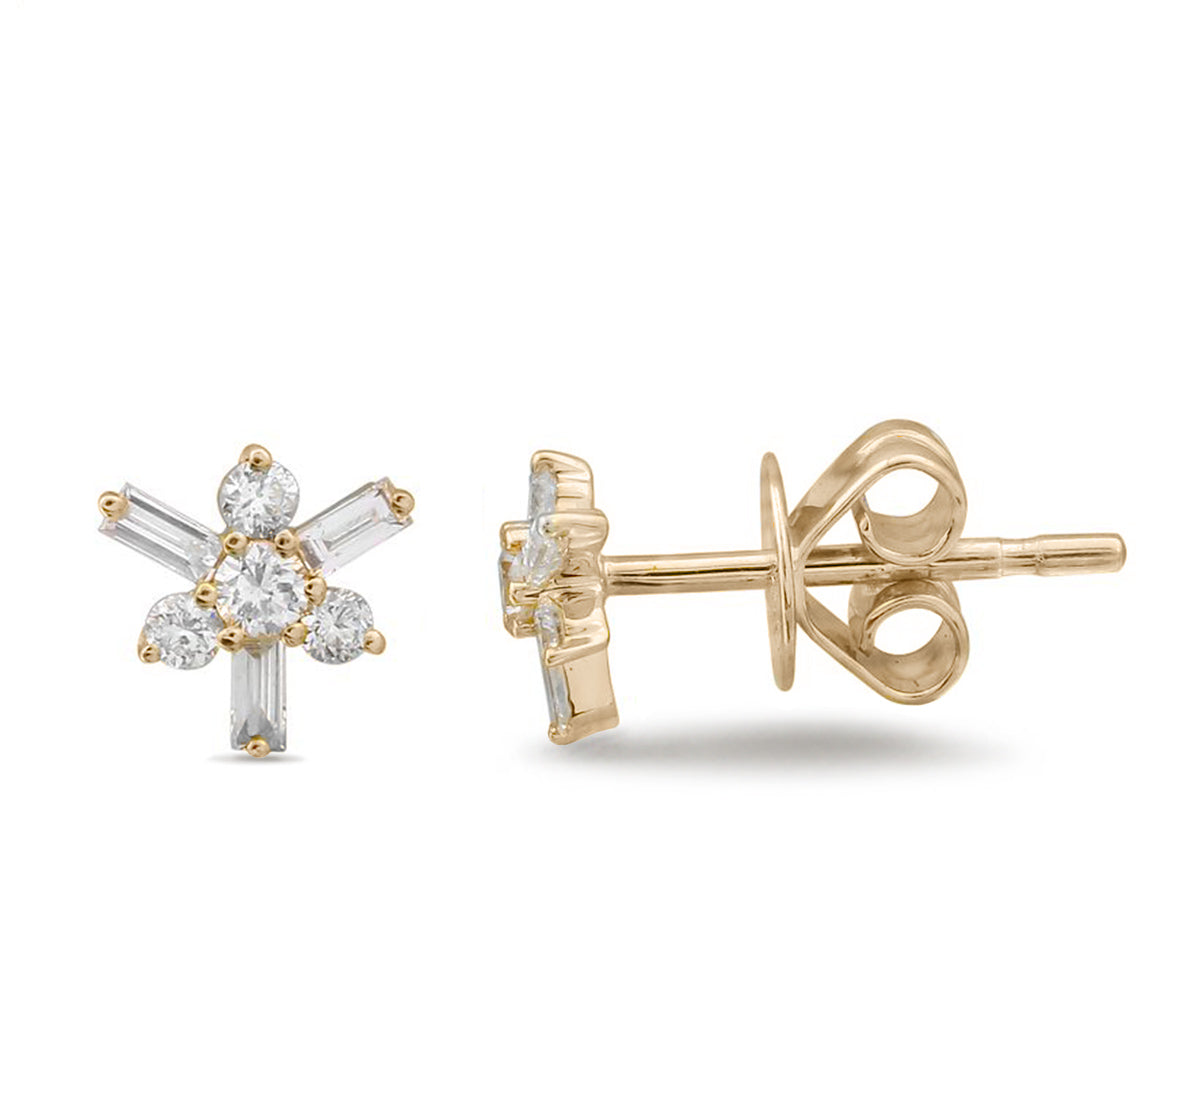 14k yellow gold baguette and round cut diamond cluster stud earrings